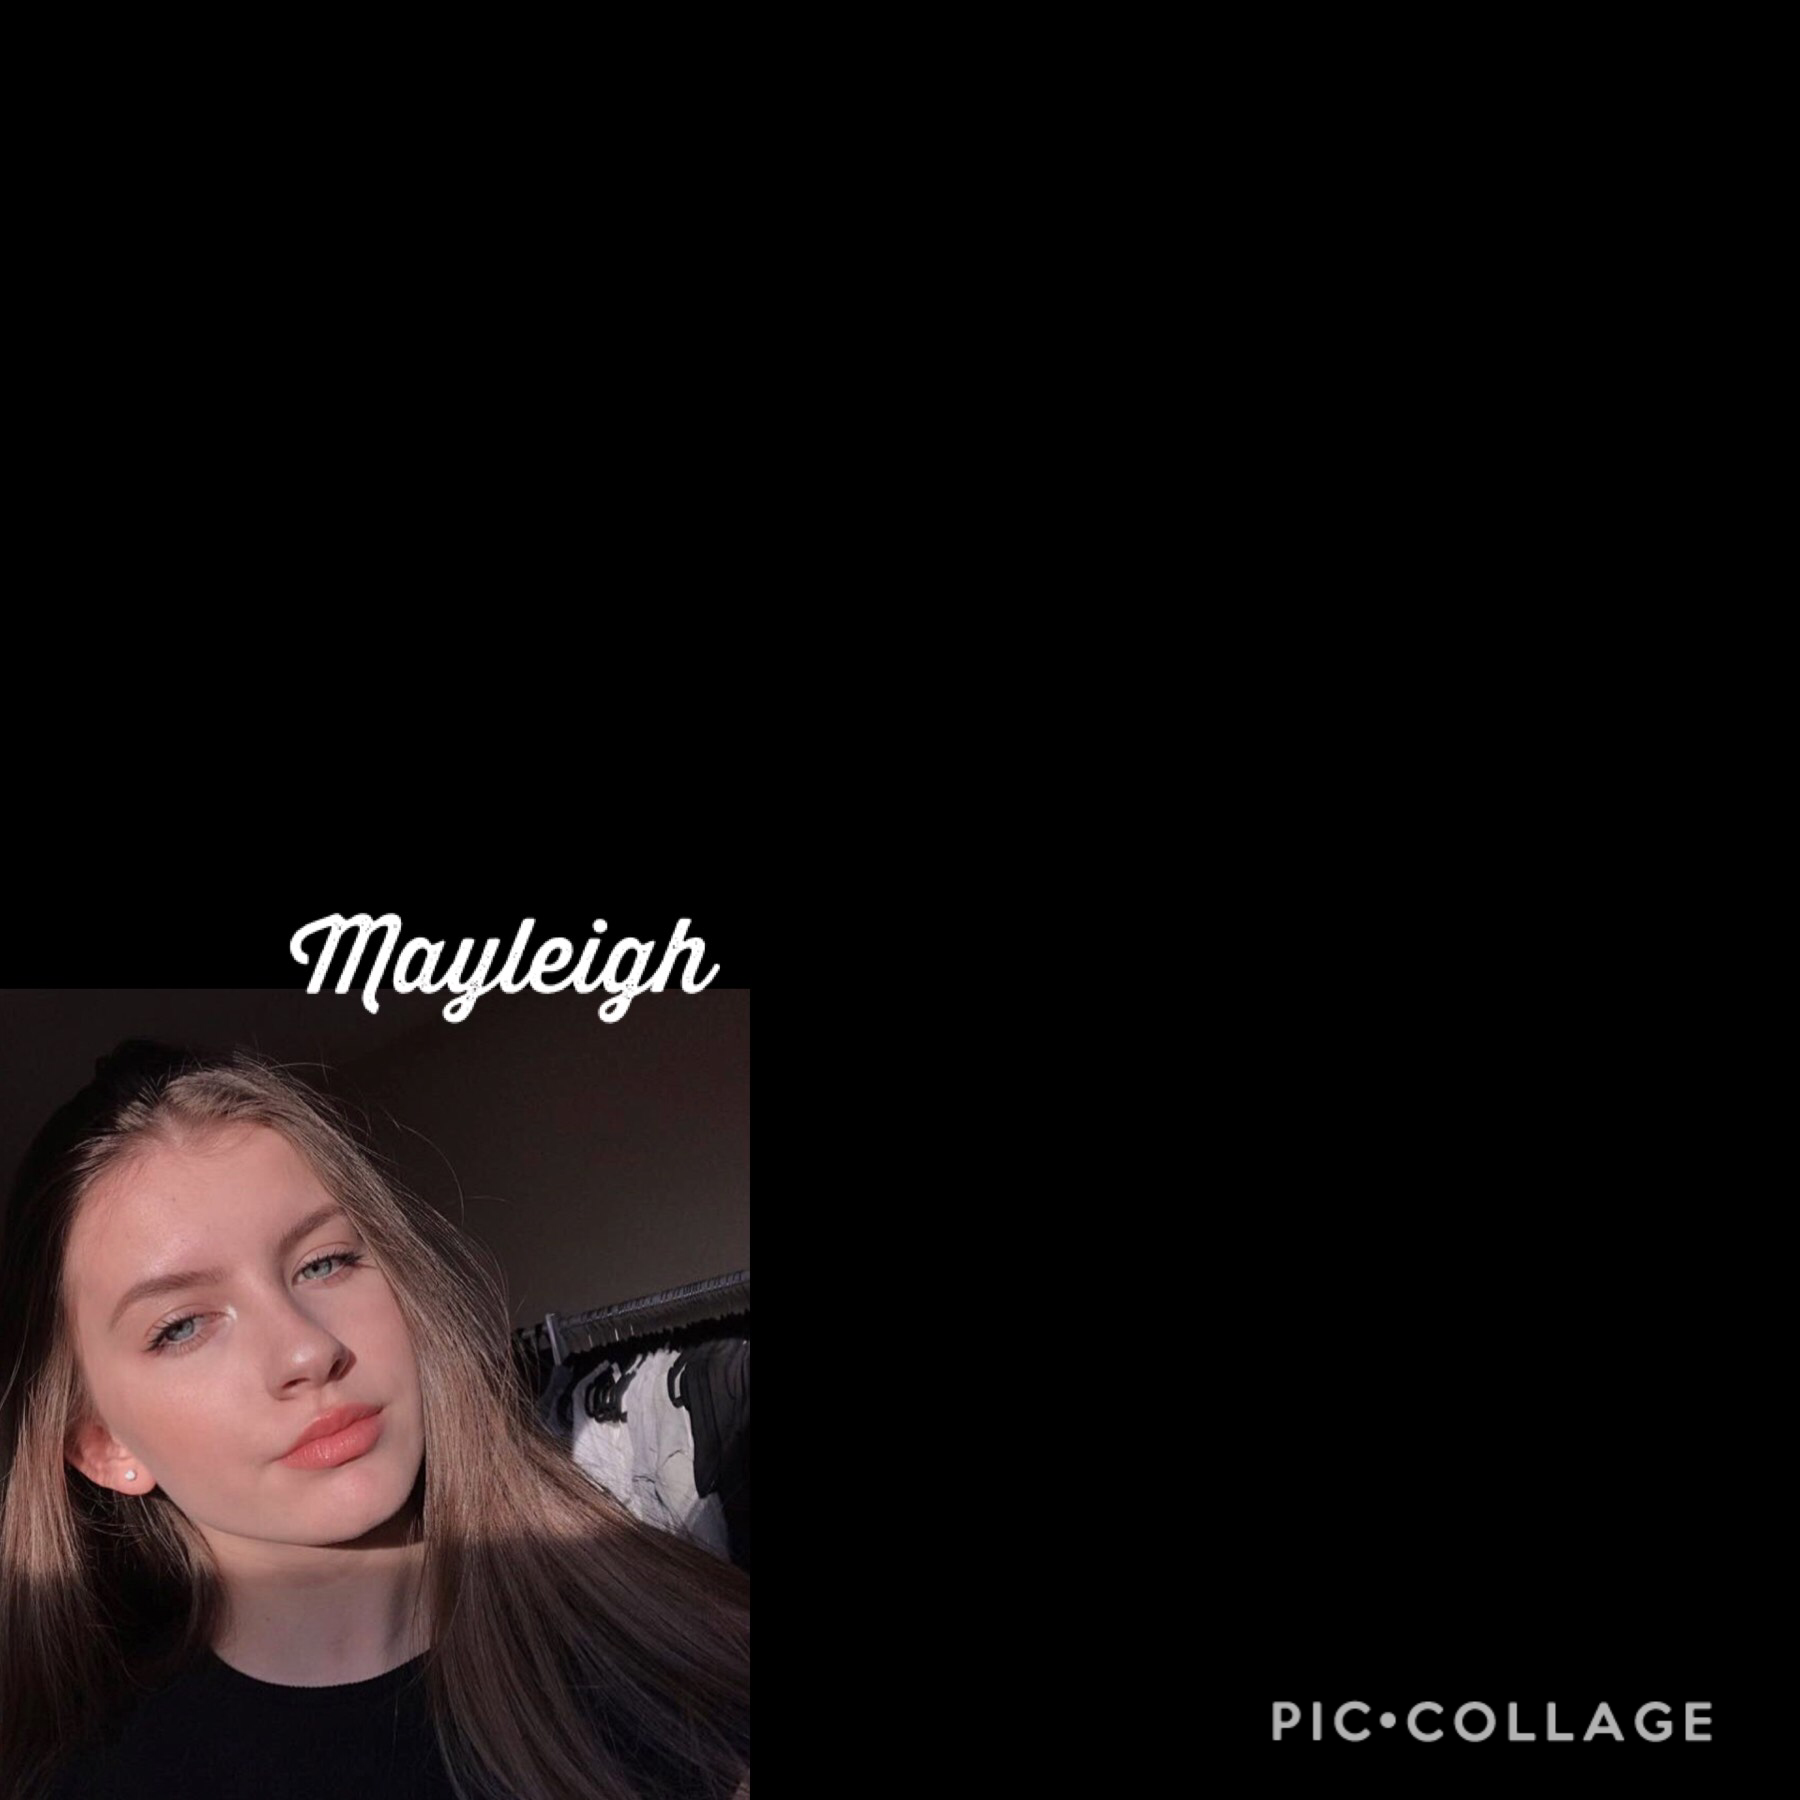 tap-
Mayleigh 
8. 29. 18 💘
I could use friends:) 